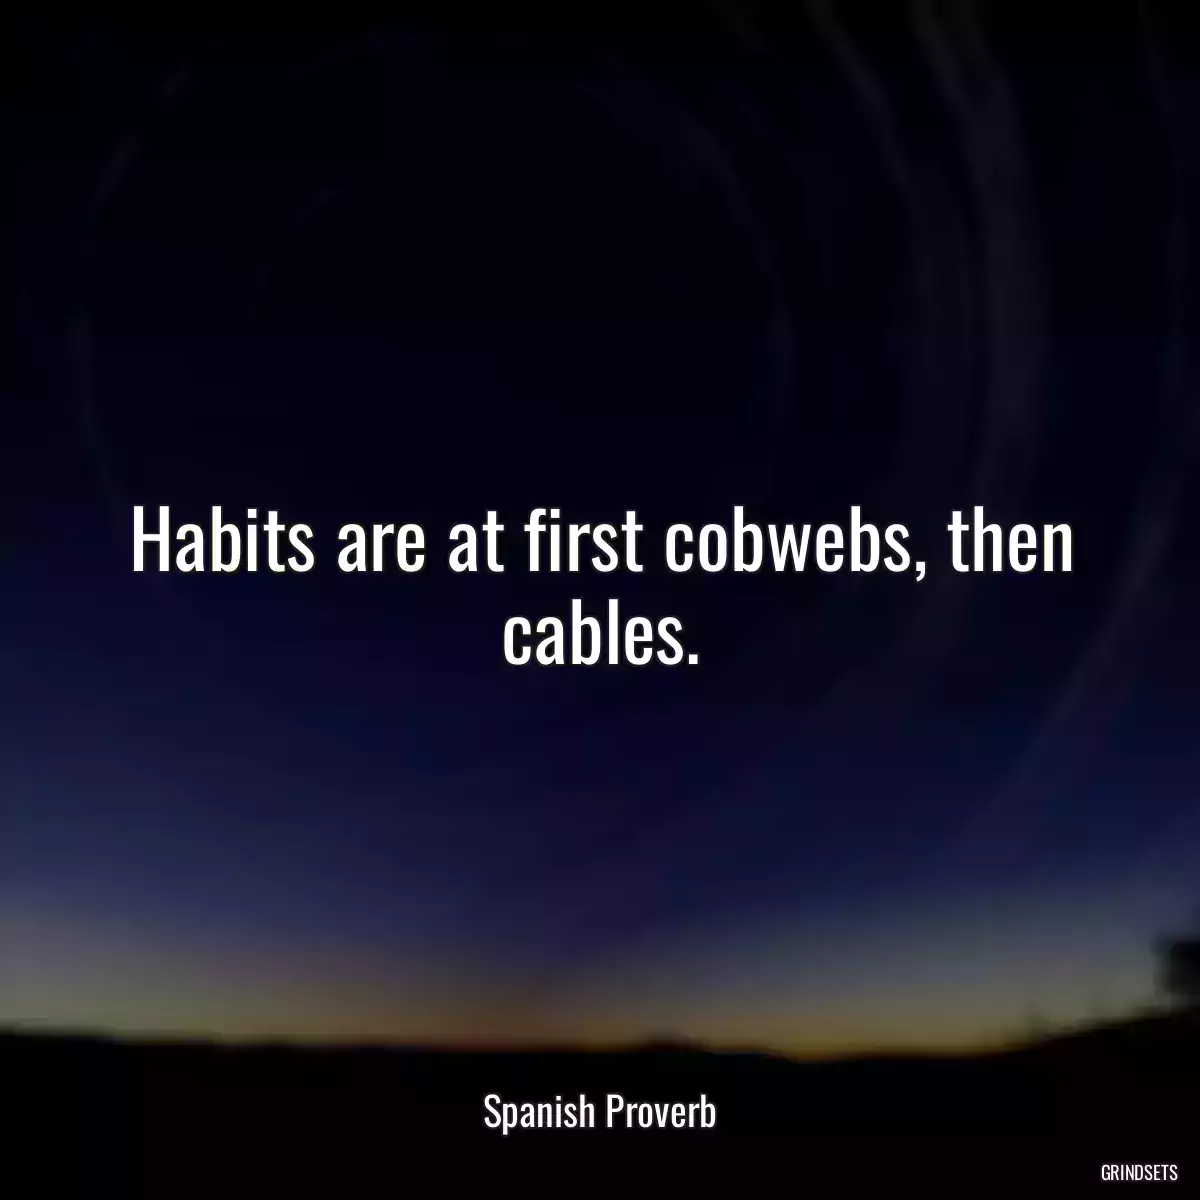 Habits are at first cobwebs, then cables.